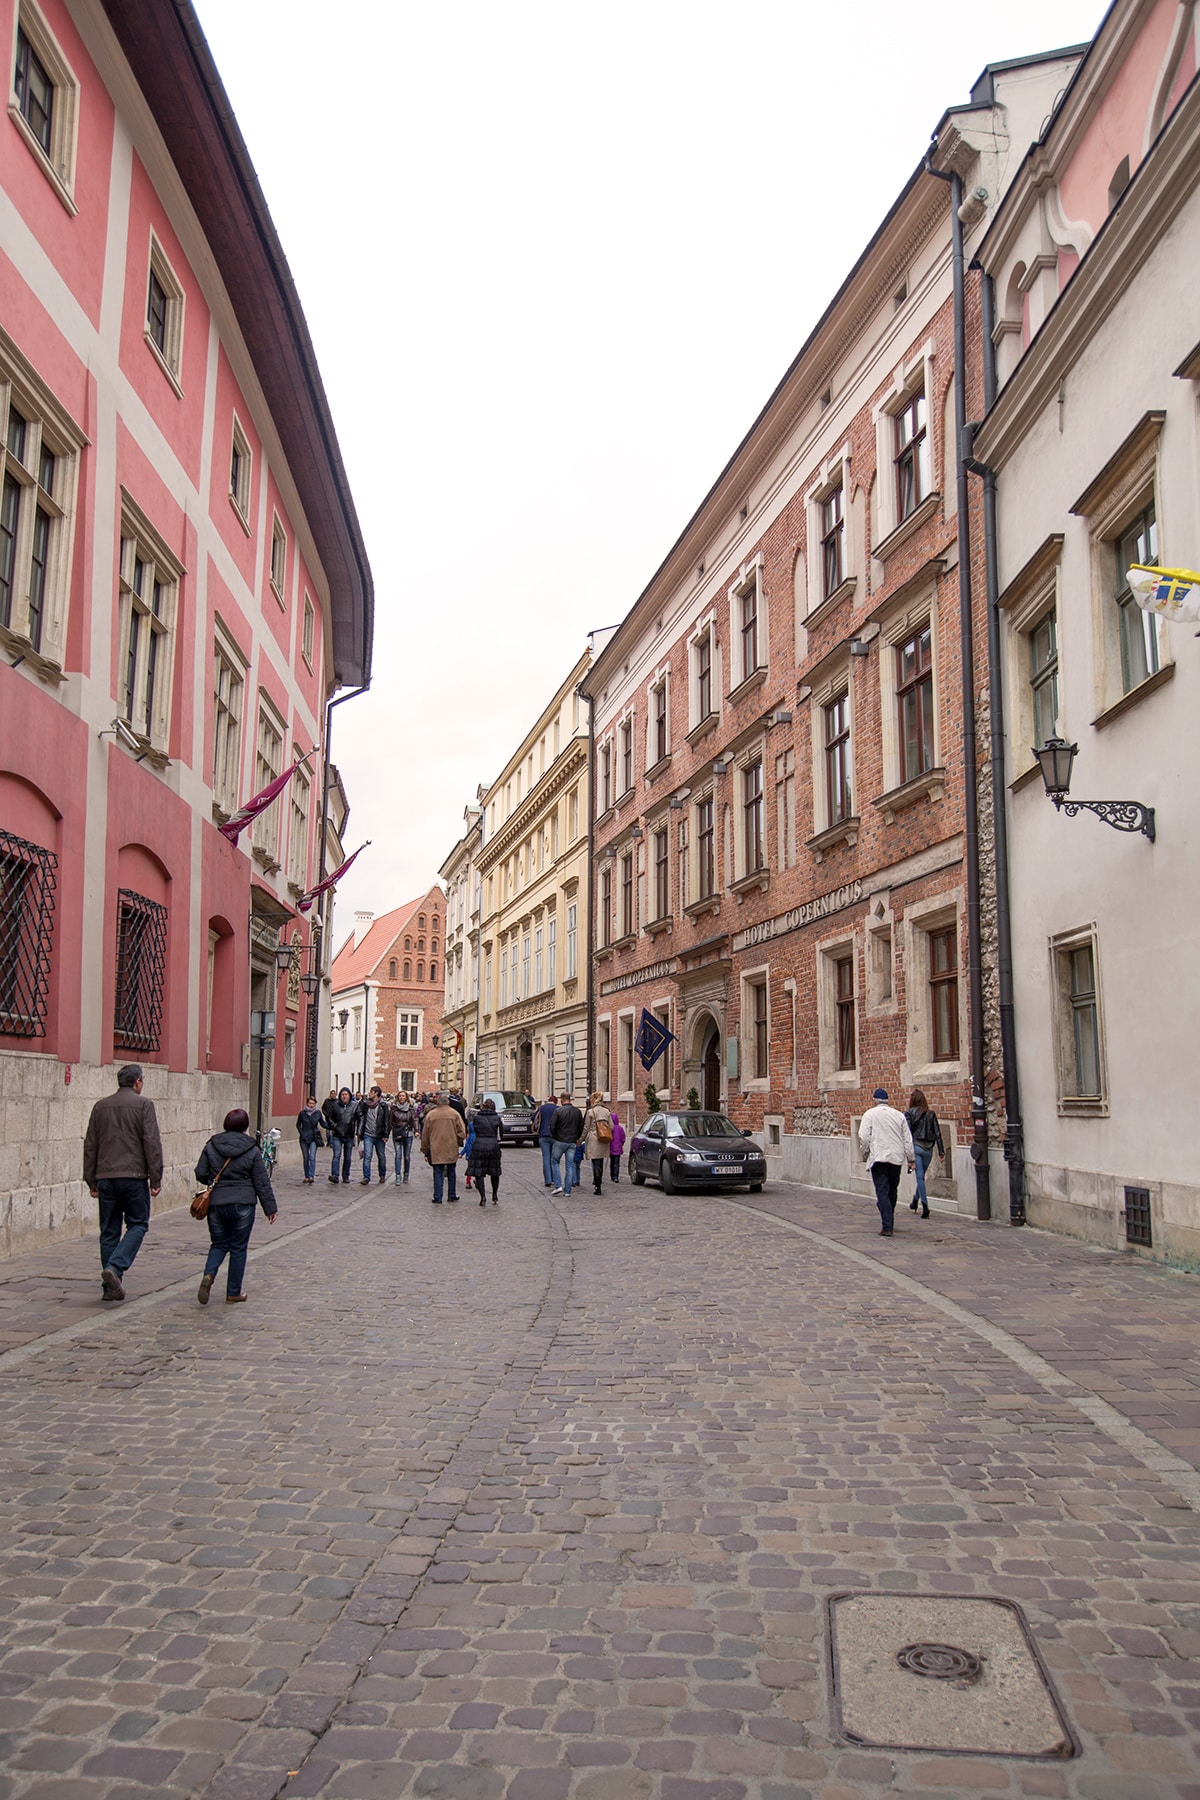 Krakow's main square- love all the colorful buildings!